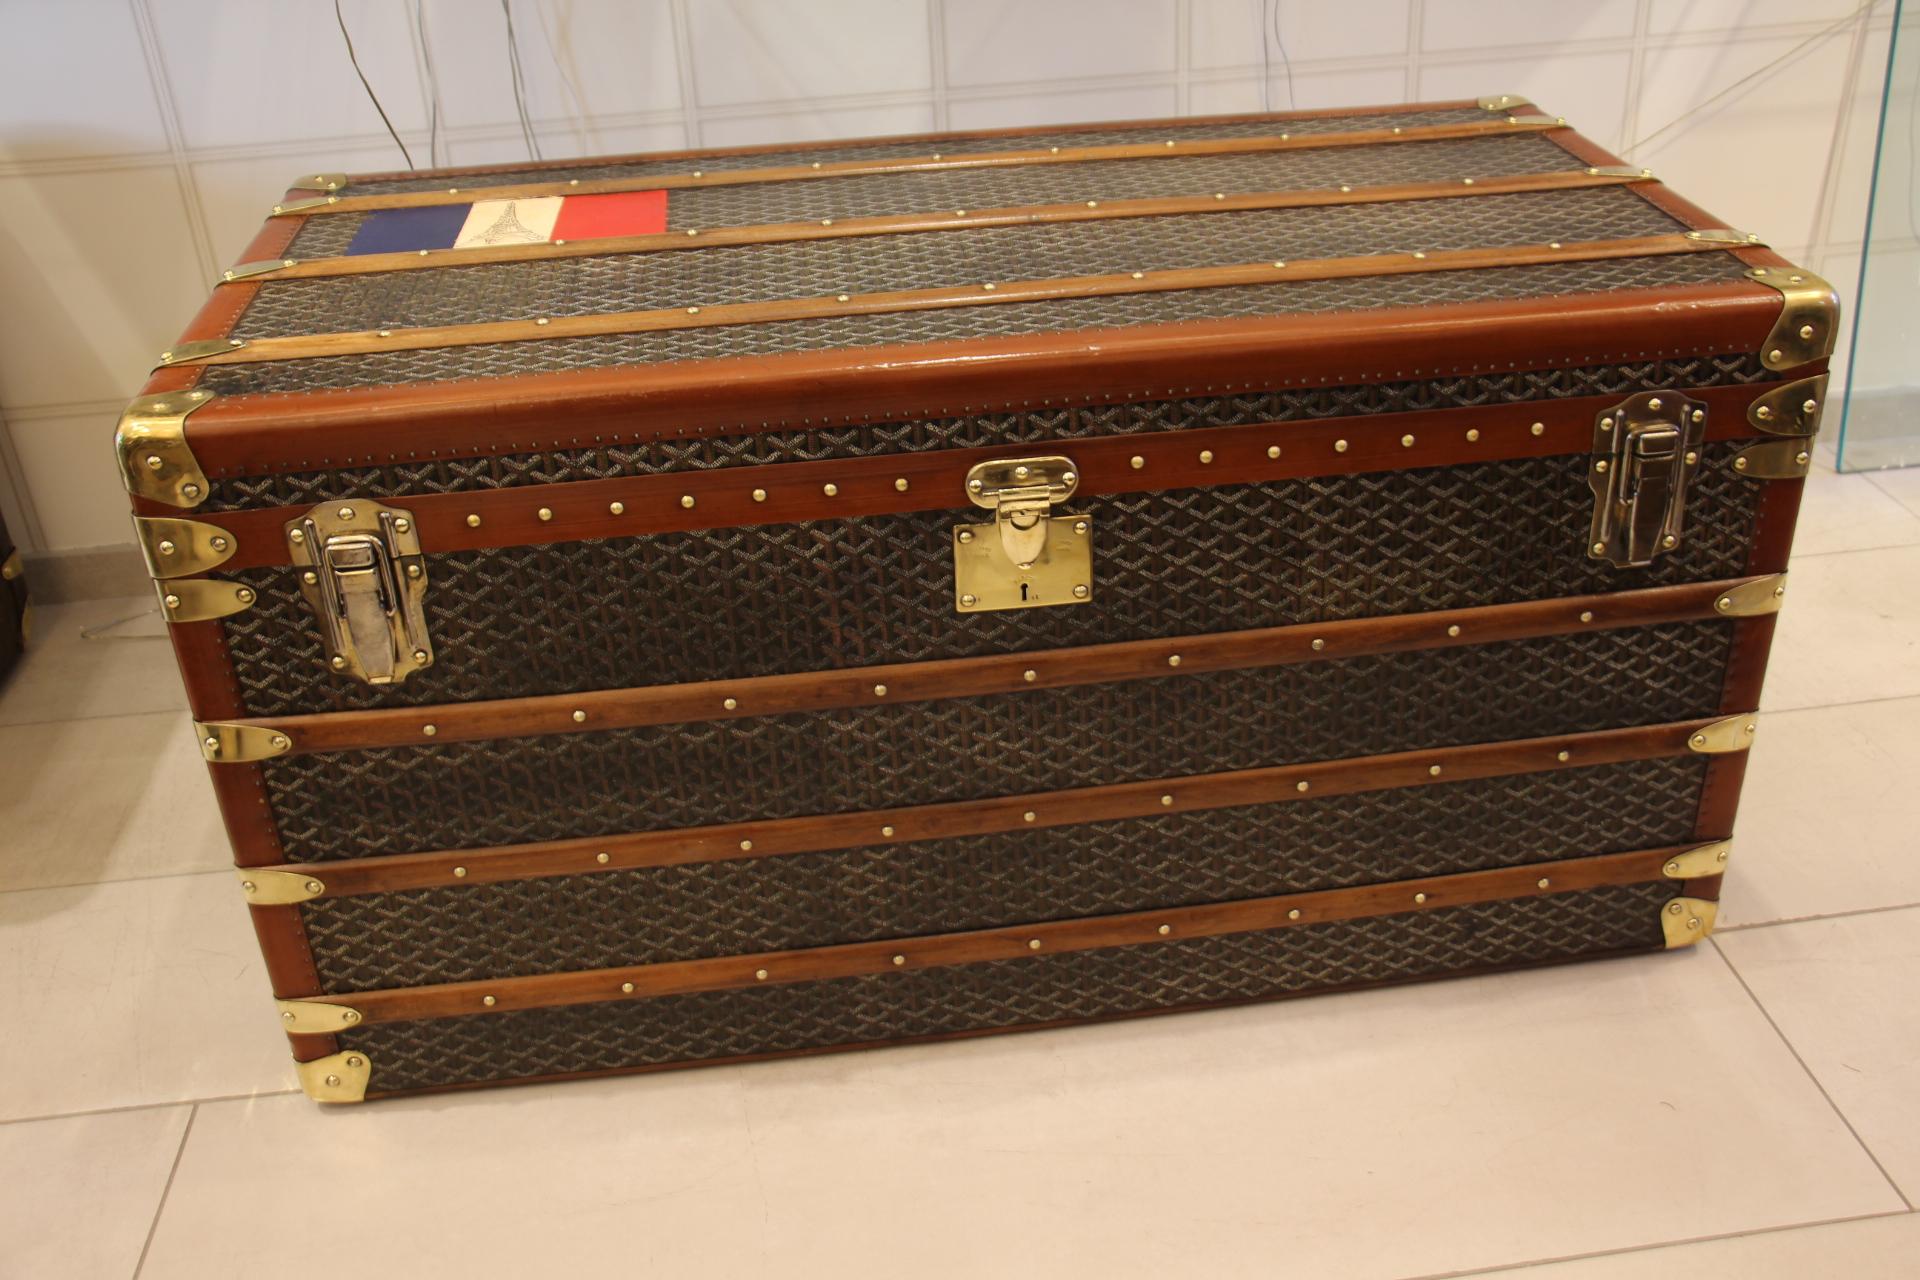 This Aine Goyard courrier trunk has got very nice proportions as well as a beautiful, warm patina.
It features its famous and sought after chevron canvas, its original solid brass Goyard stamped lock, its honey color trim and its large leather side